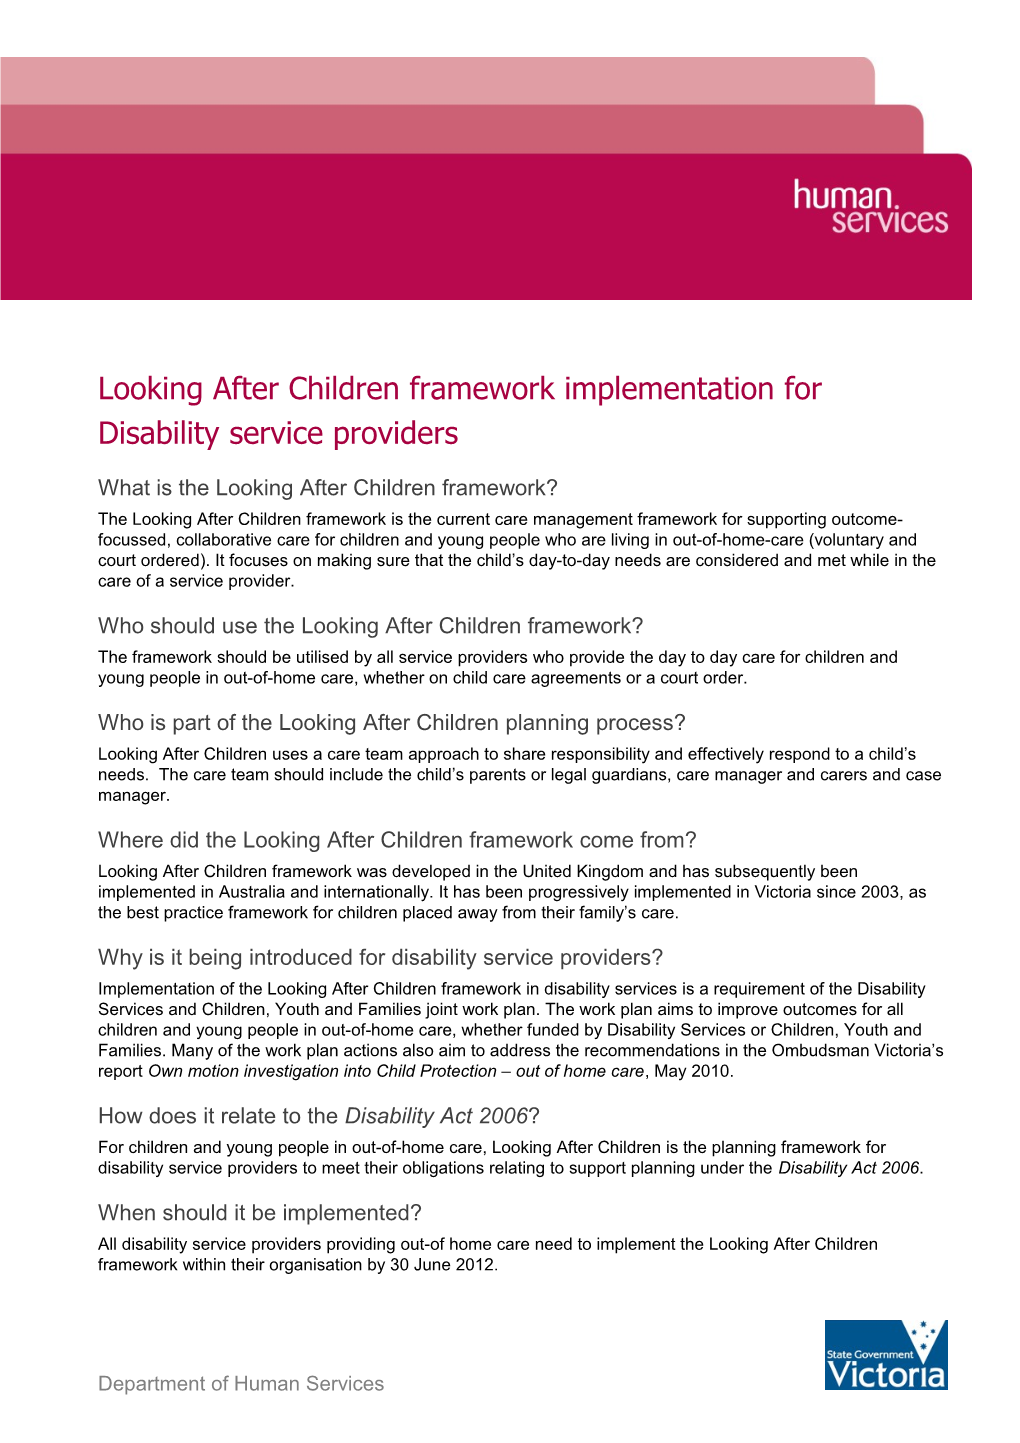 Looking After Children Framework Implementation for Disability Service Providers